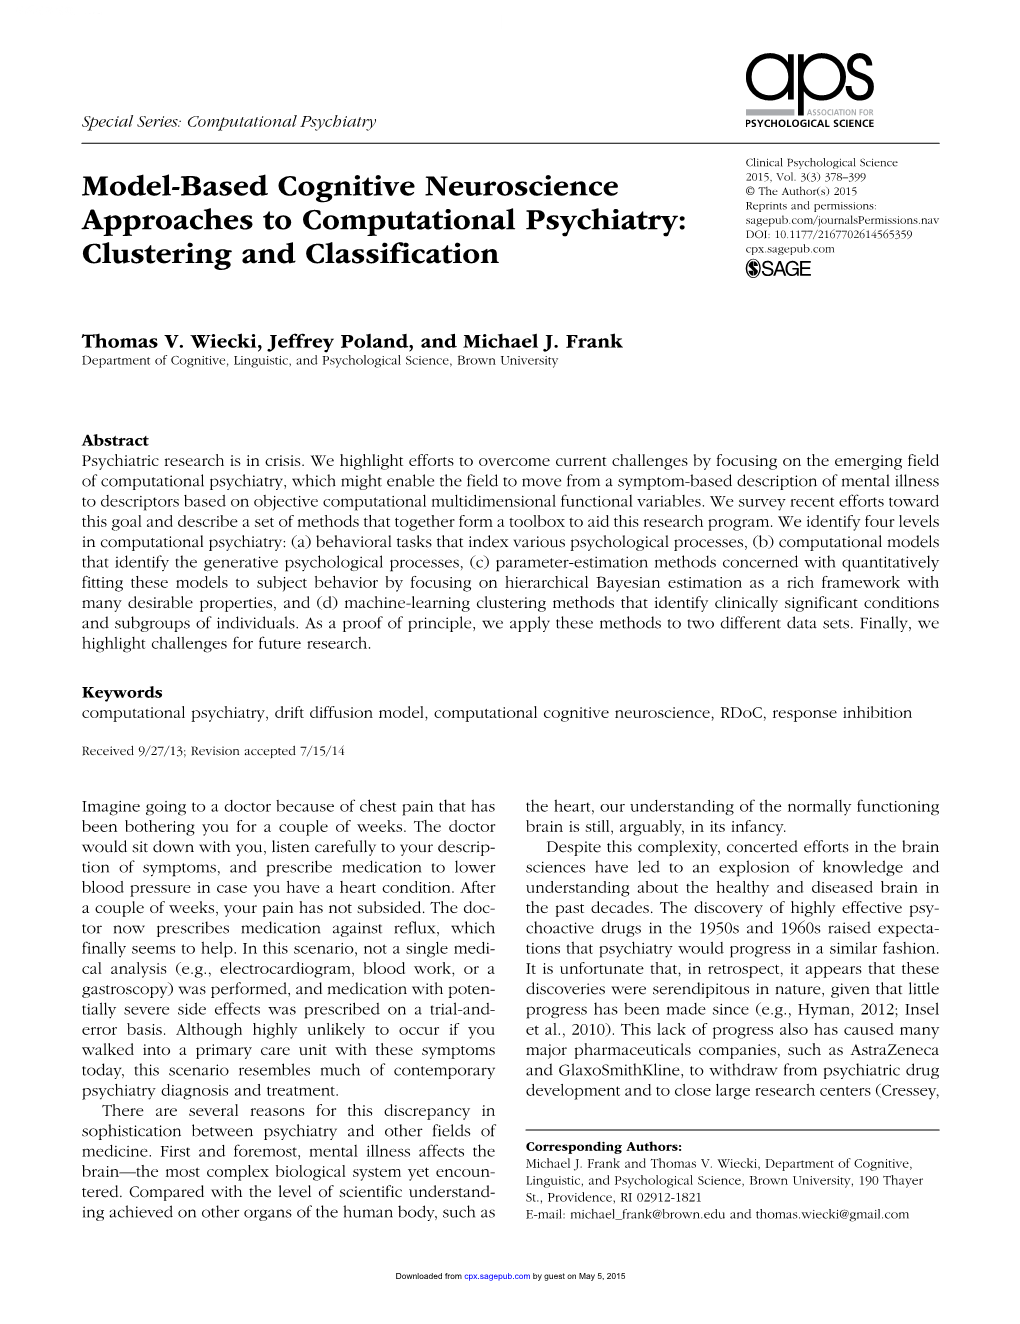 Model-Based Cognitive Neuroscience Approaches to Computational